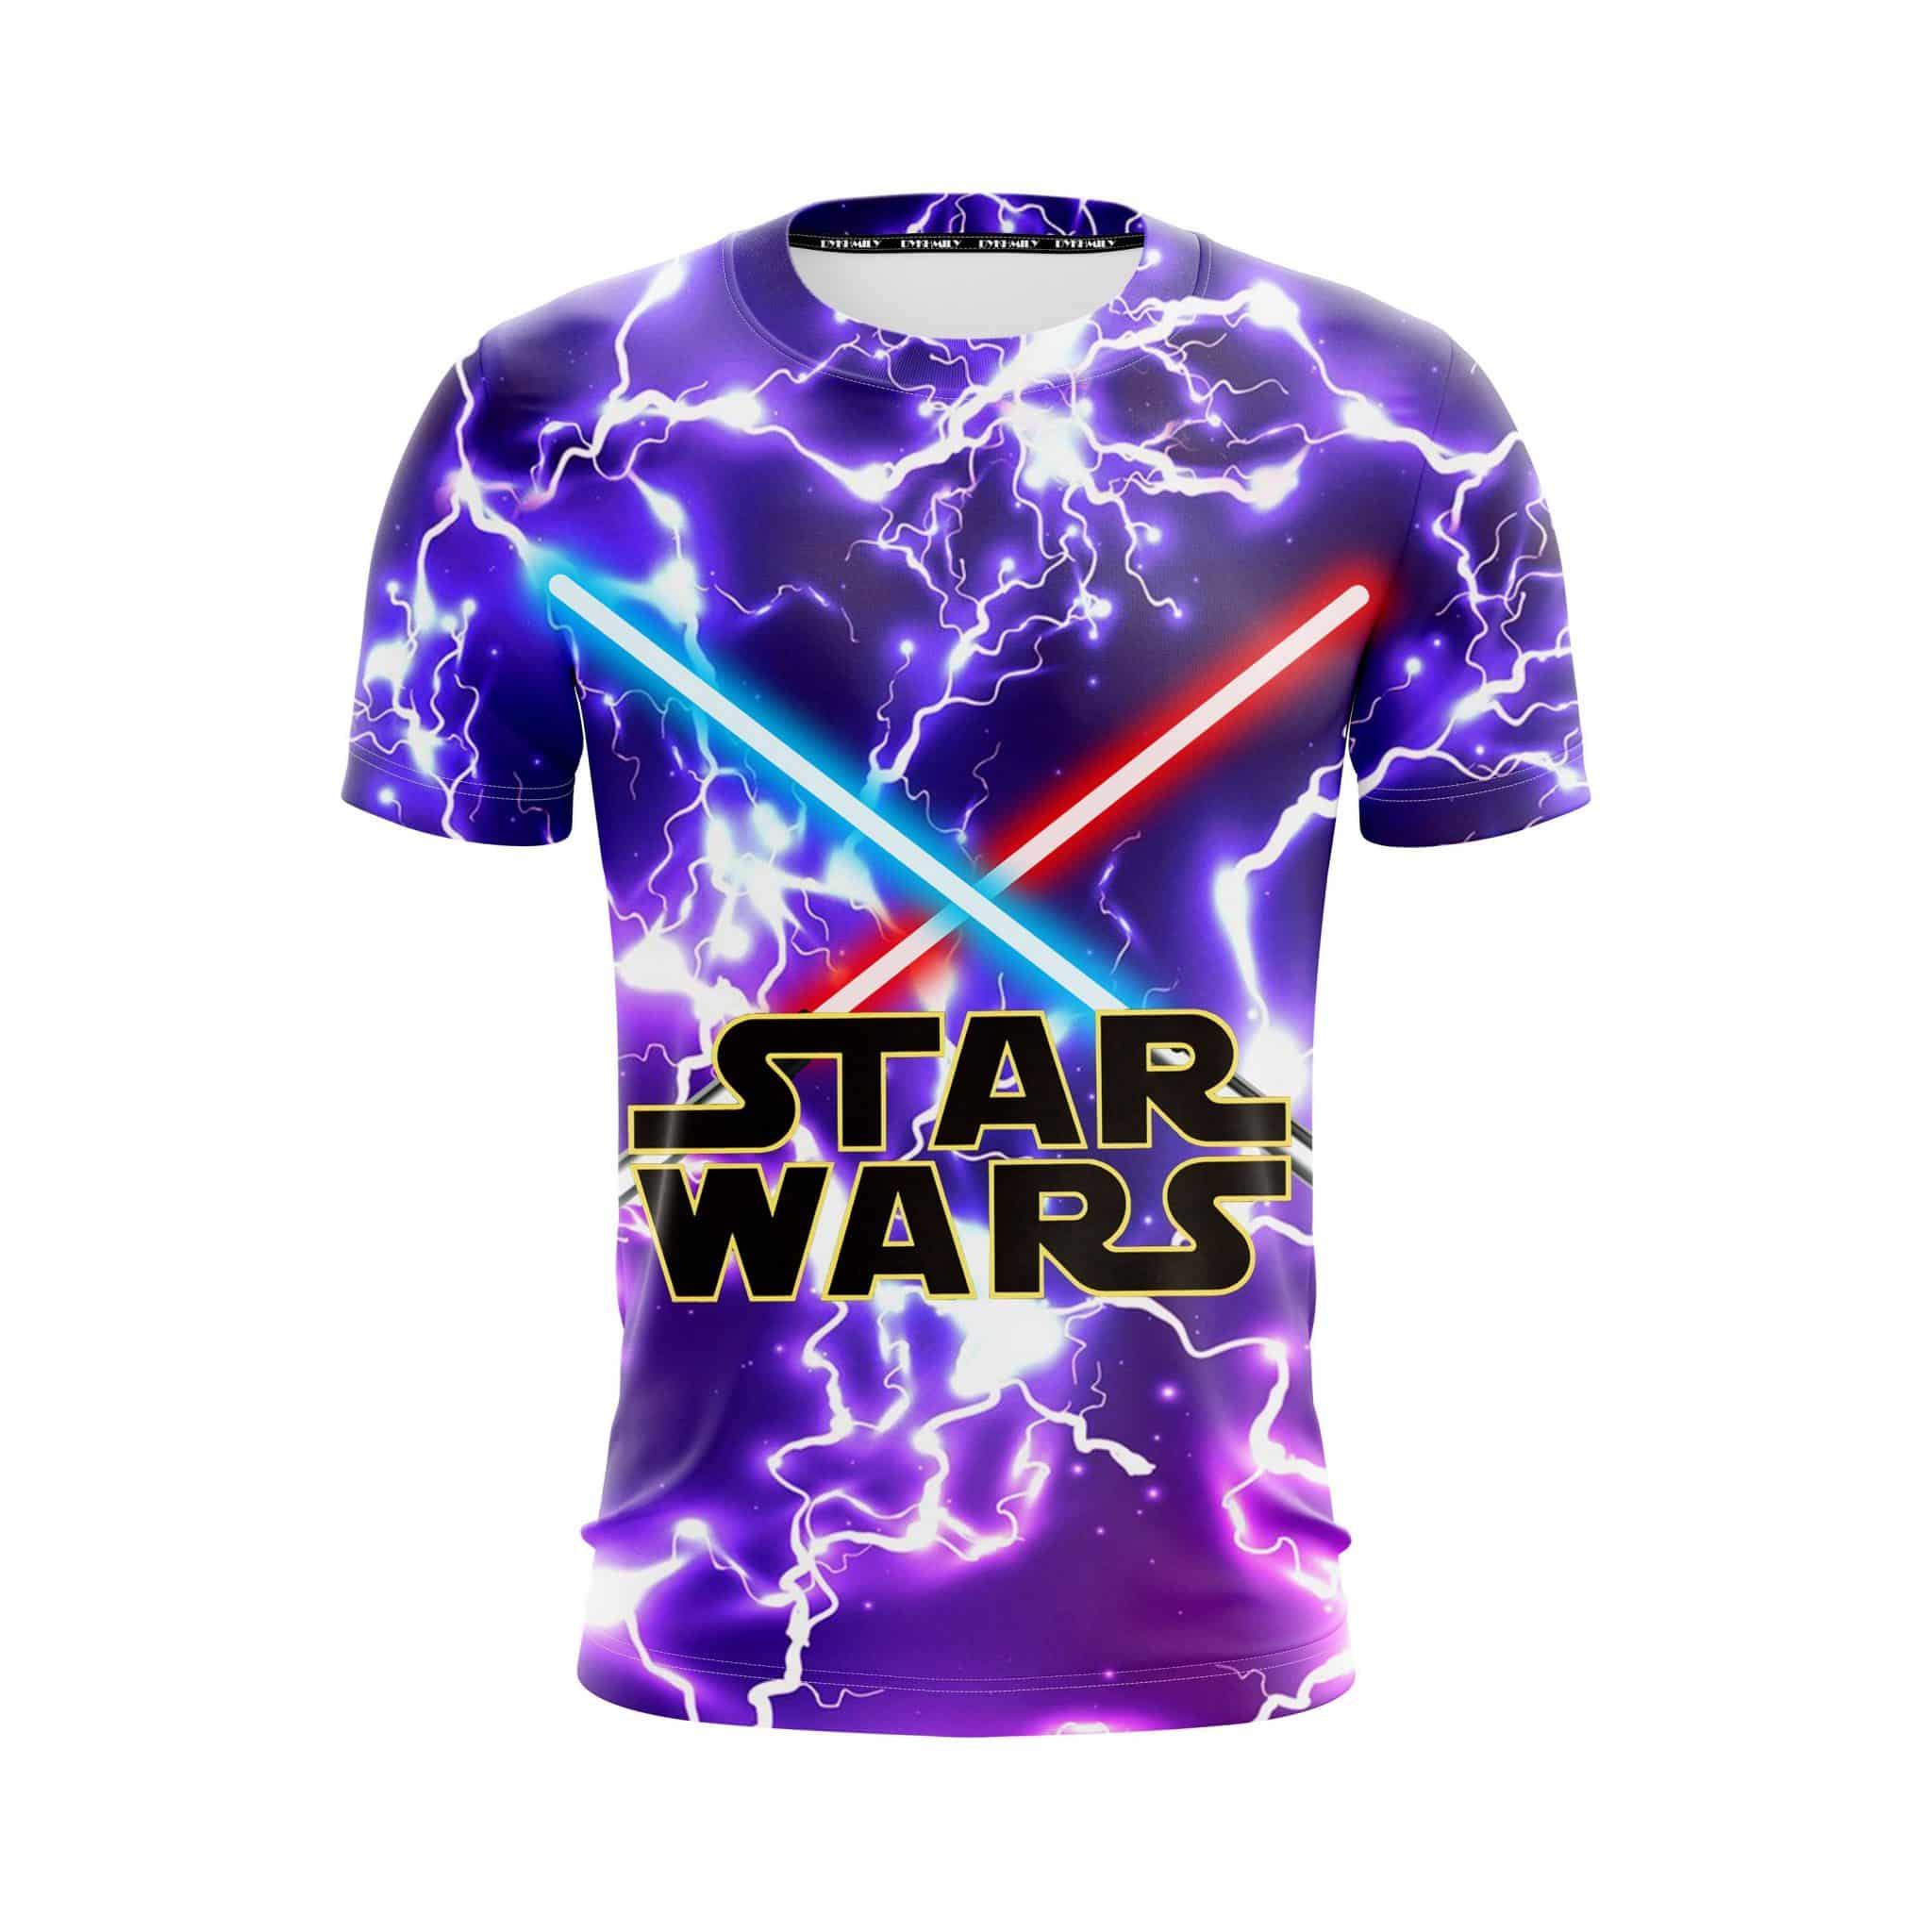 Star Red Logo Wars T-Shirt & Blue With Lightsaber Purple